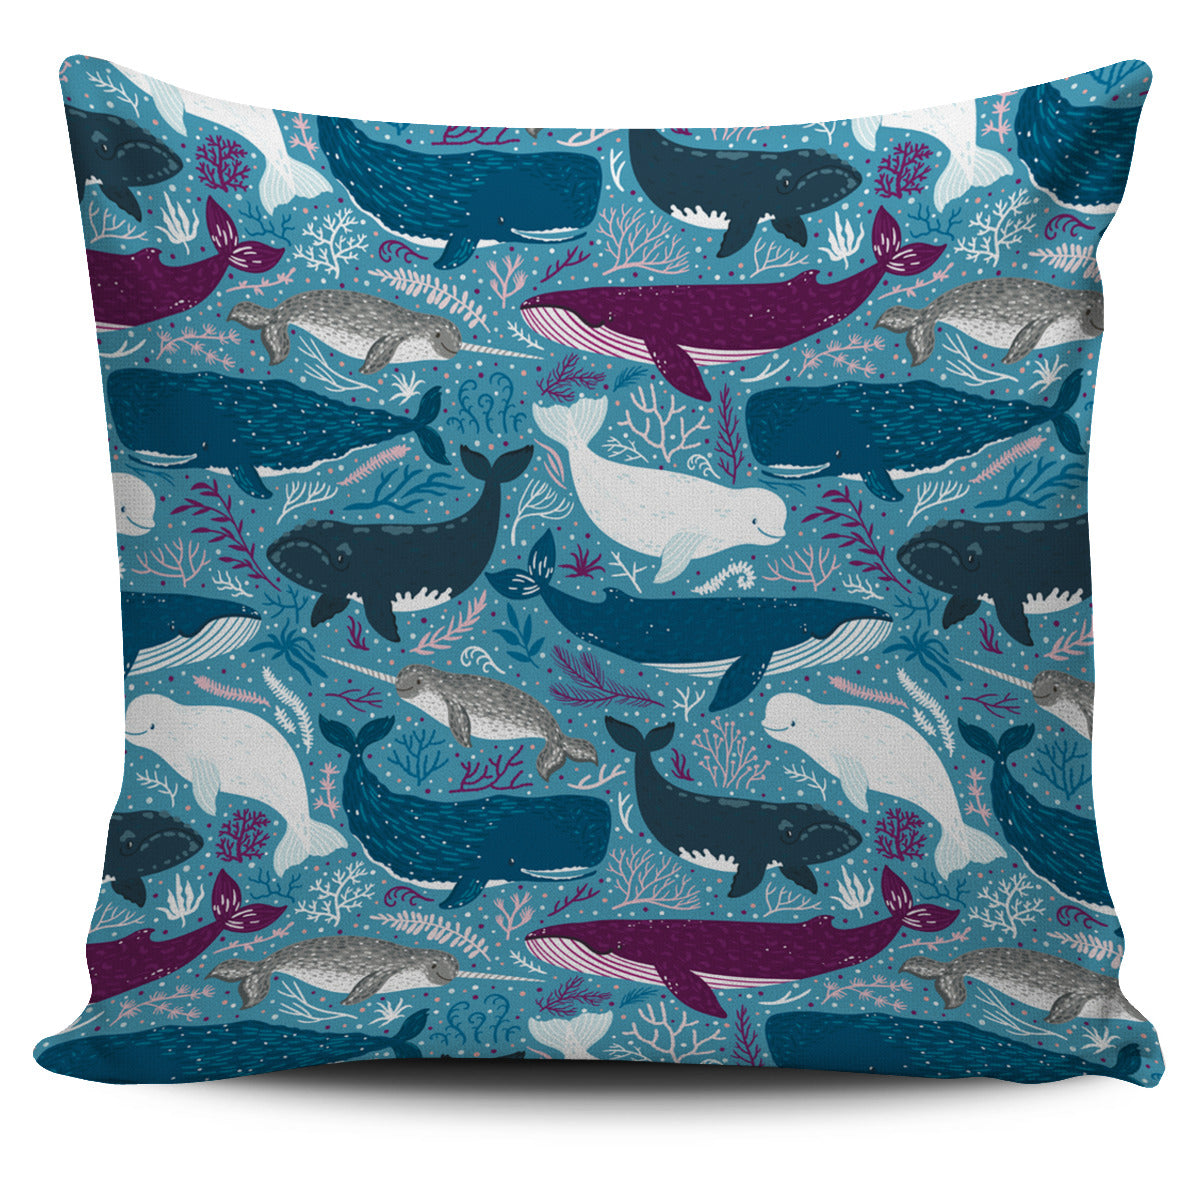 Whale Party Pillow Cover